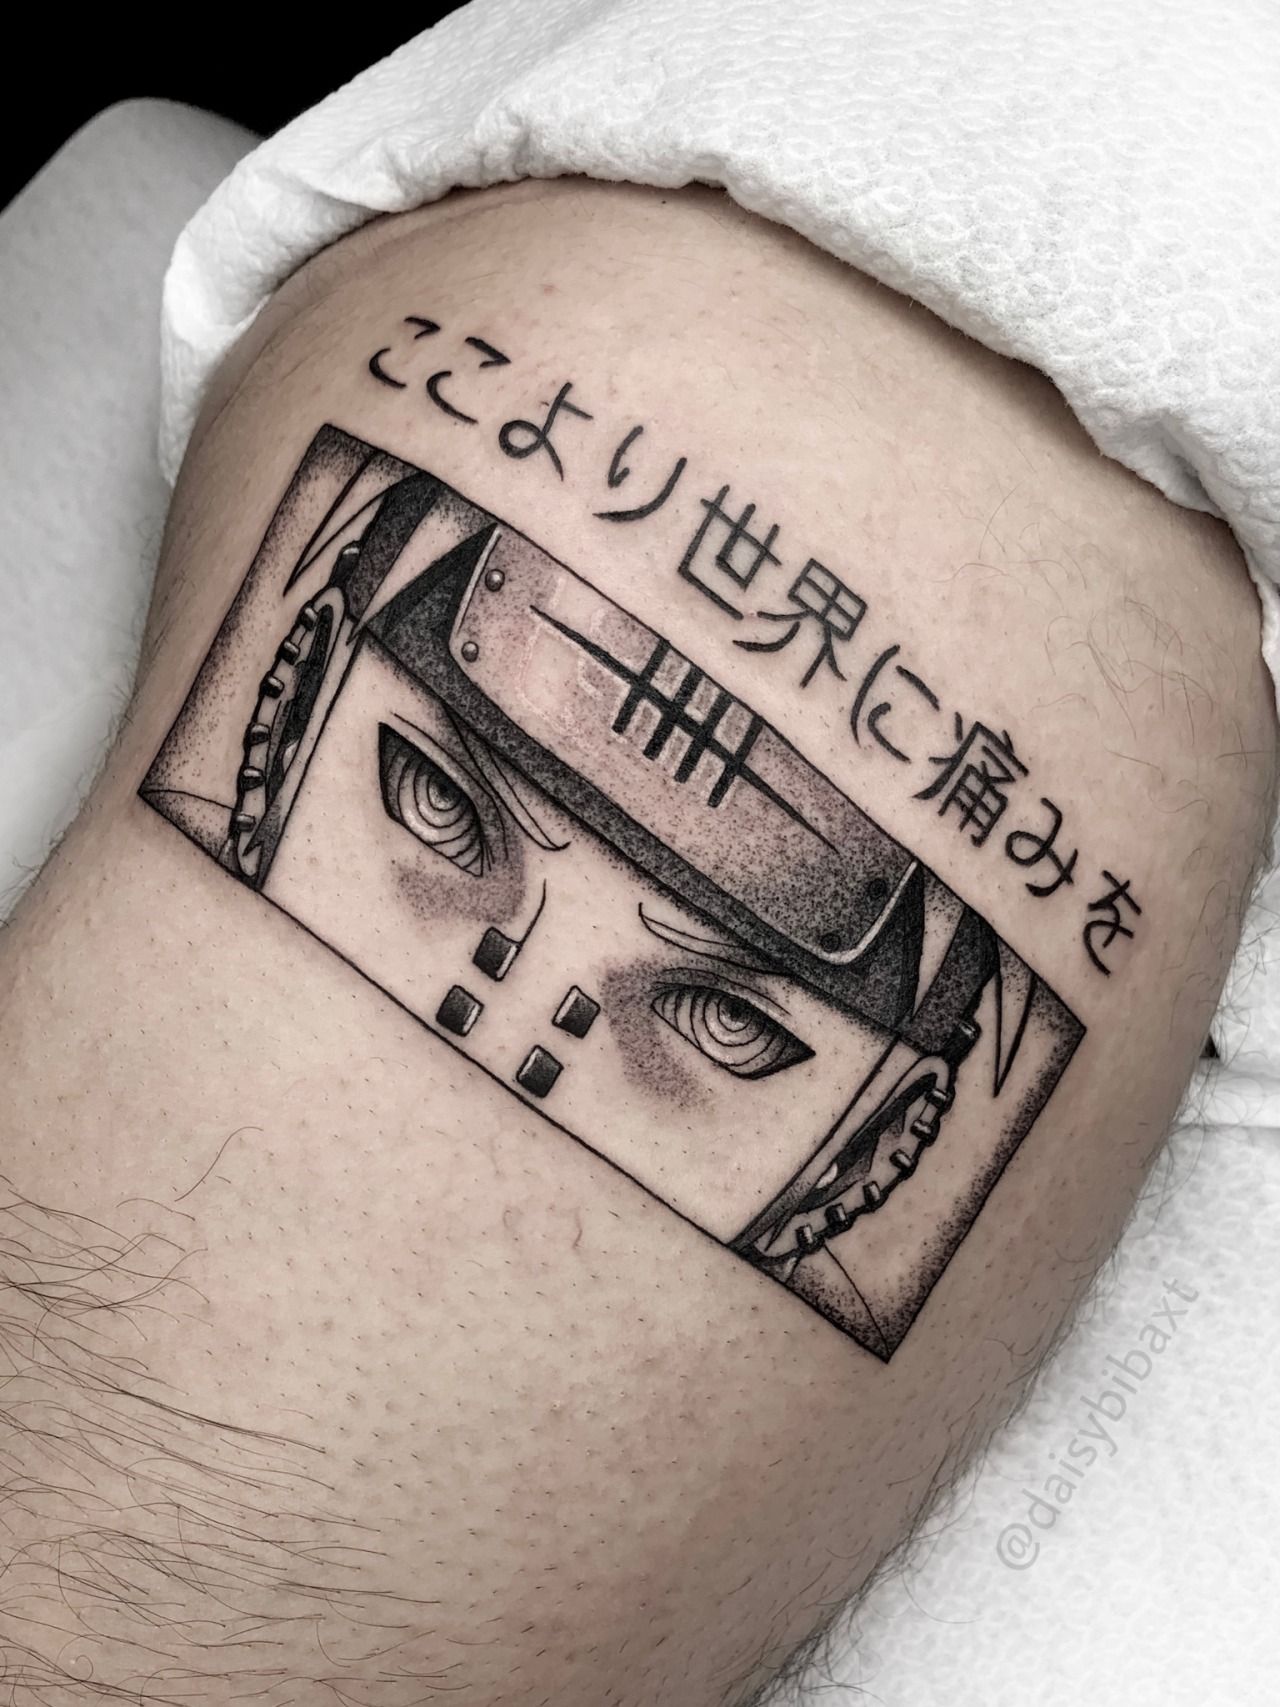 adam perjatel on Instagram: “Made this Pain today for Lukas, safe travels! # tattoo #naruto #greenappletattoo #longis… | Naruto tattoo, Anime tattoos,  Tattoo designs